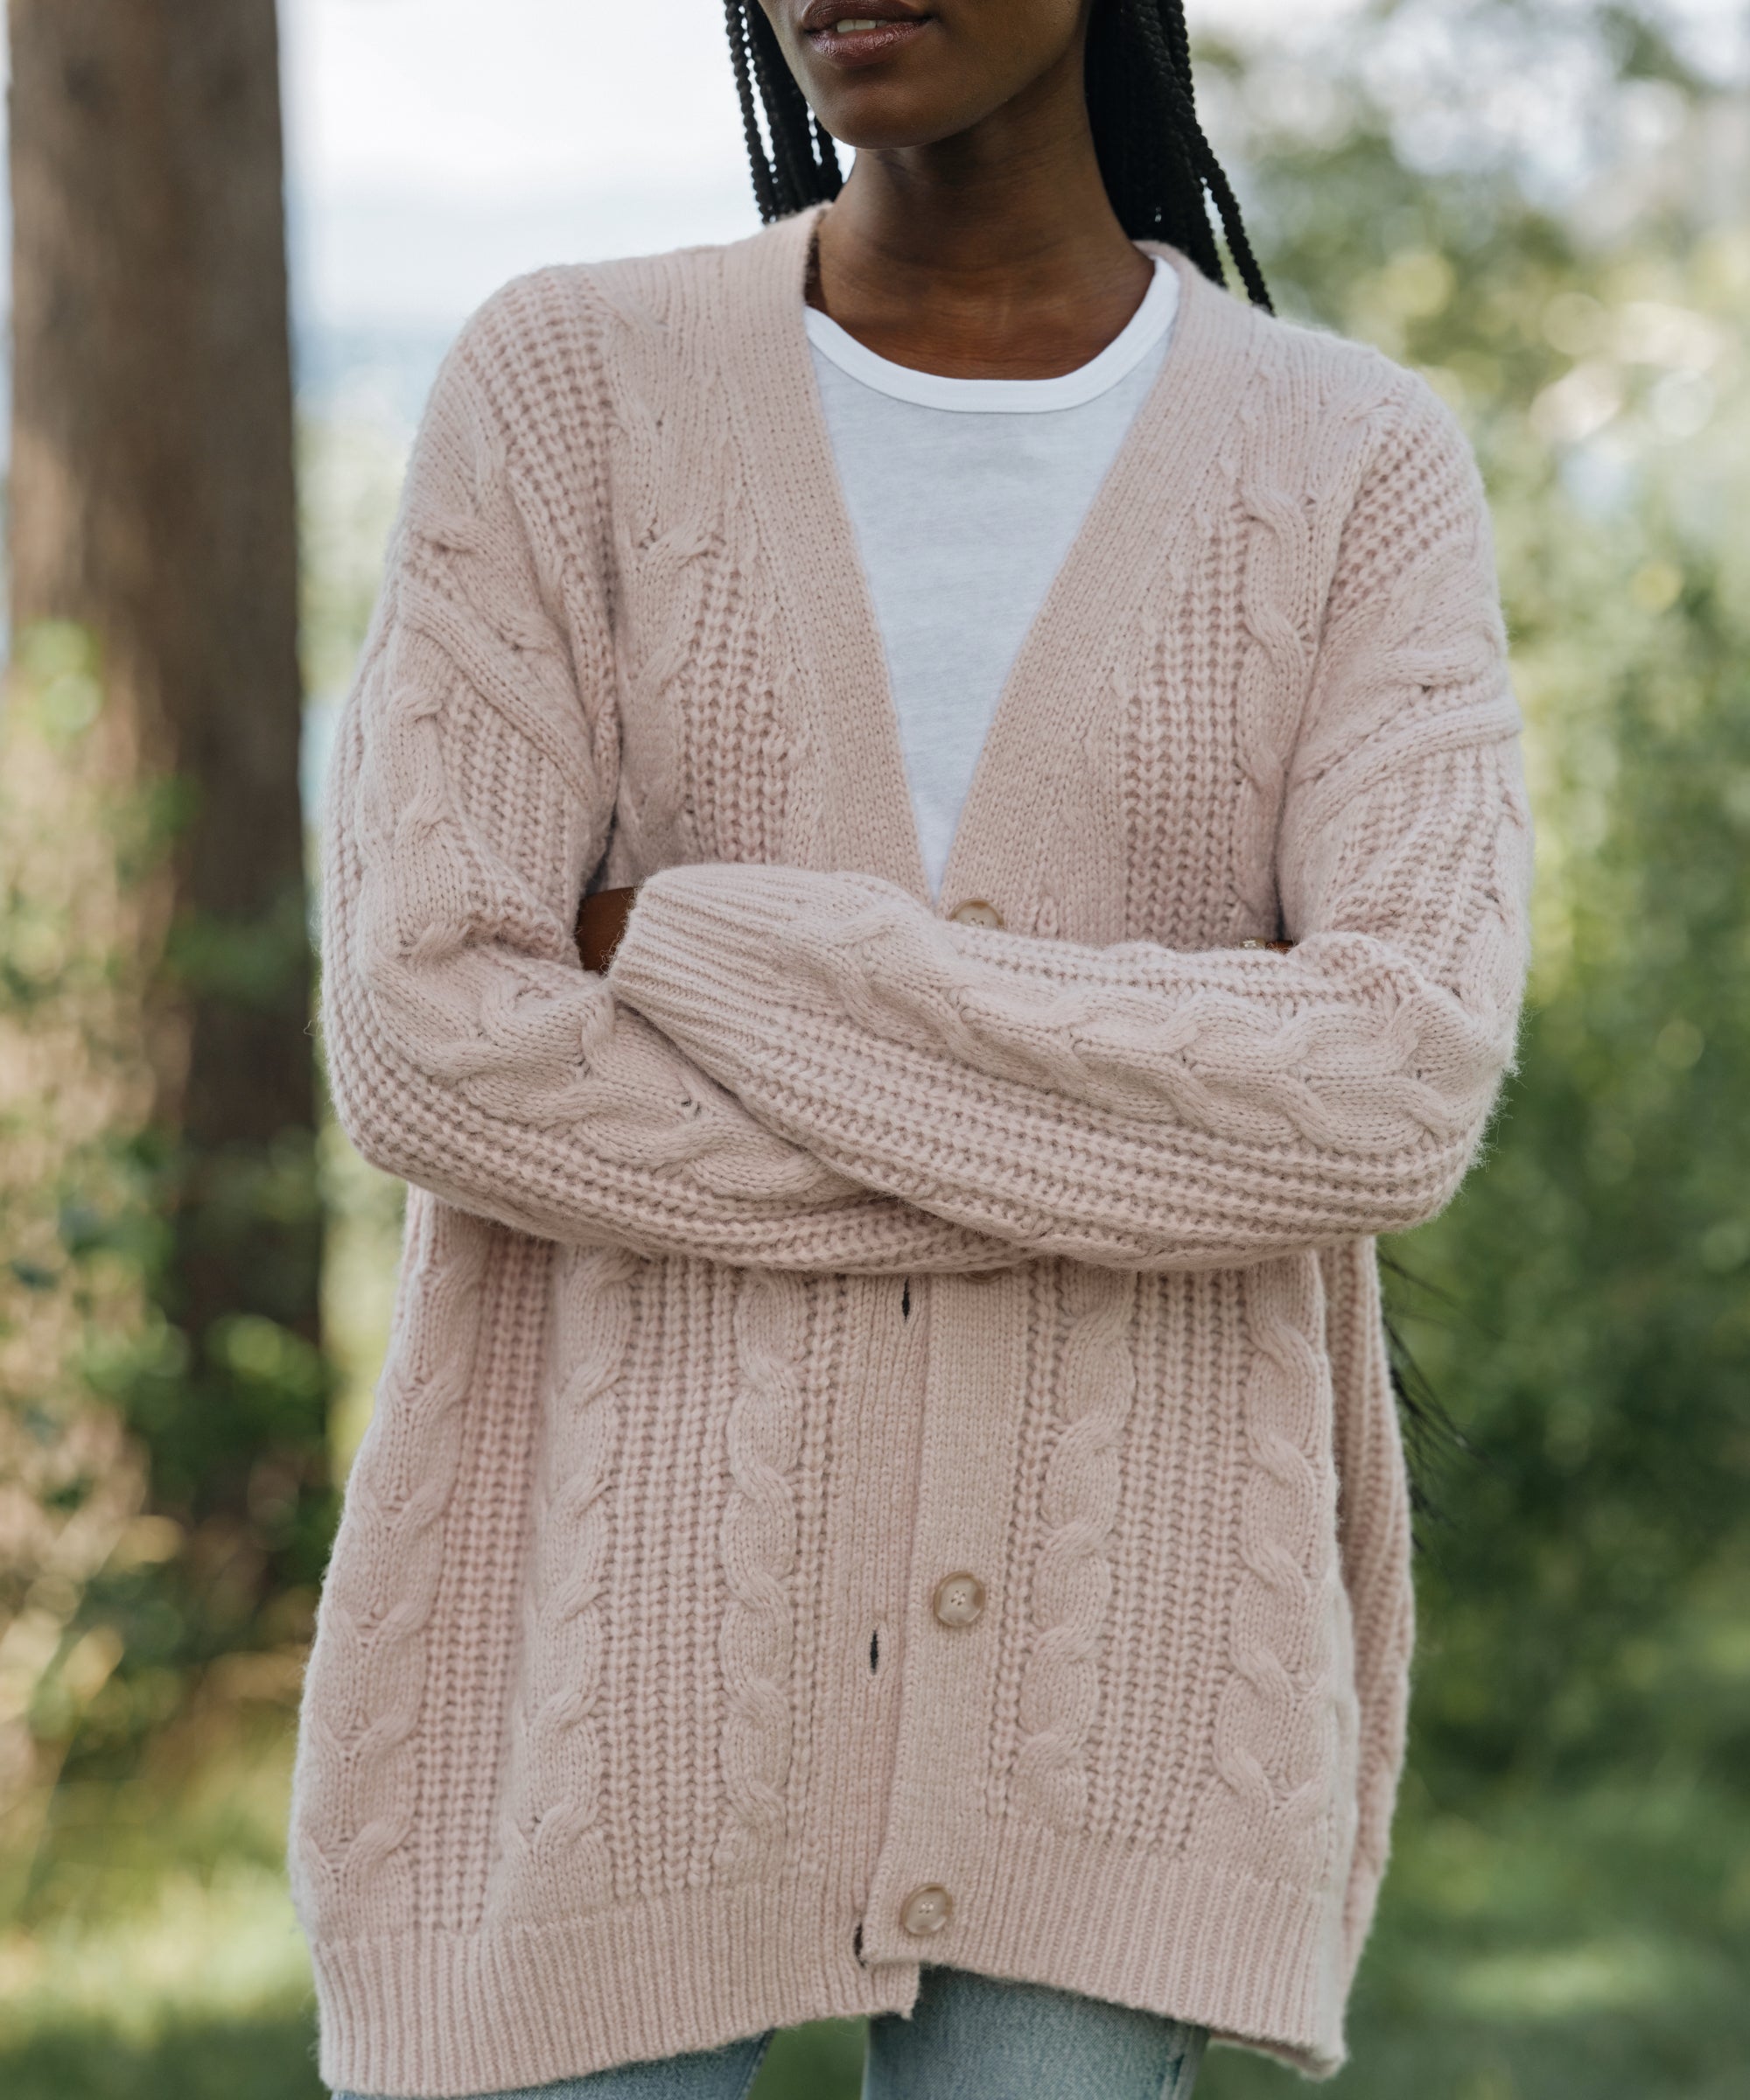 29 Ridiculously Cozy Oversized Cardigans You'll Want To Wear ASAP